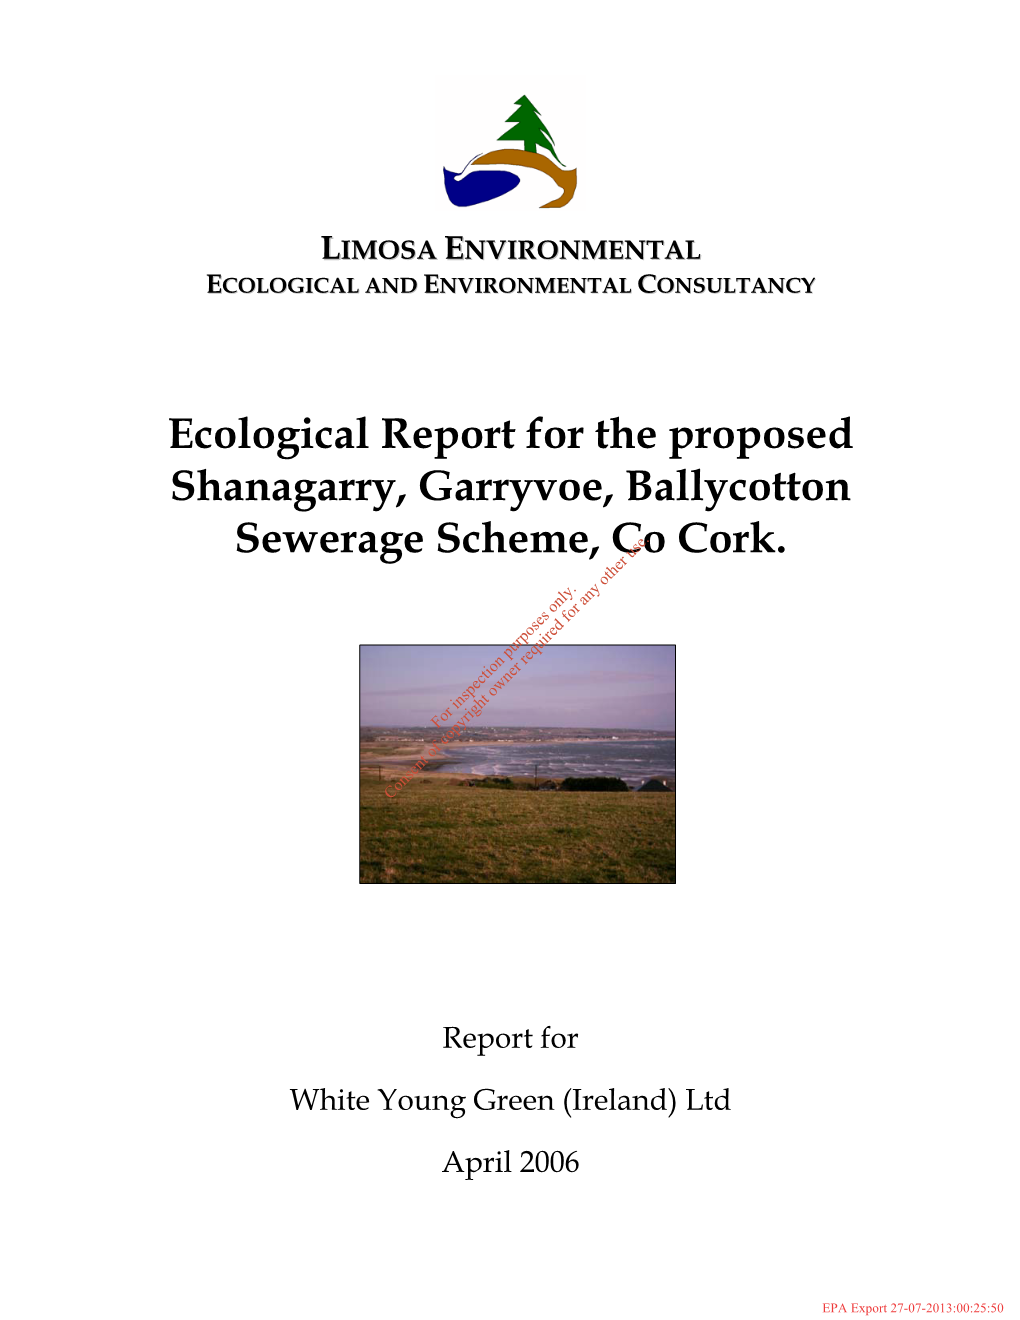 Ecological Report for the Proposed Shanagarry, Garryvoe, Ballycotton Sewerage Scheme, Co Cork